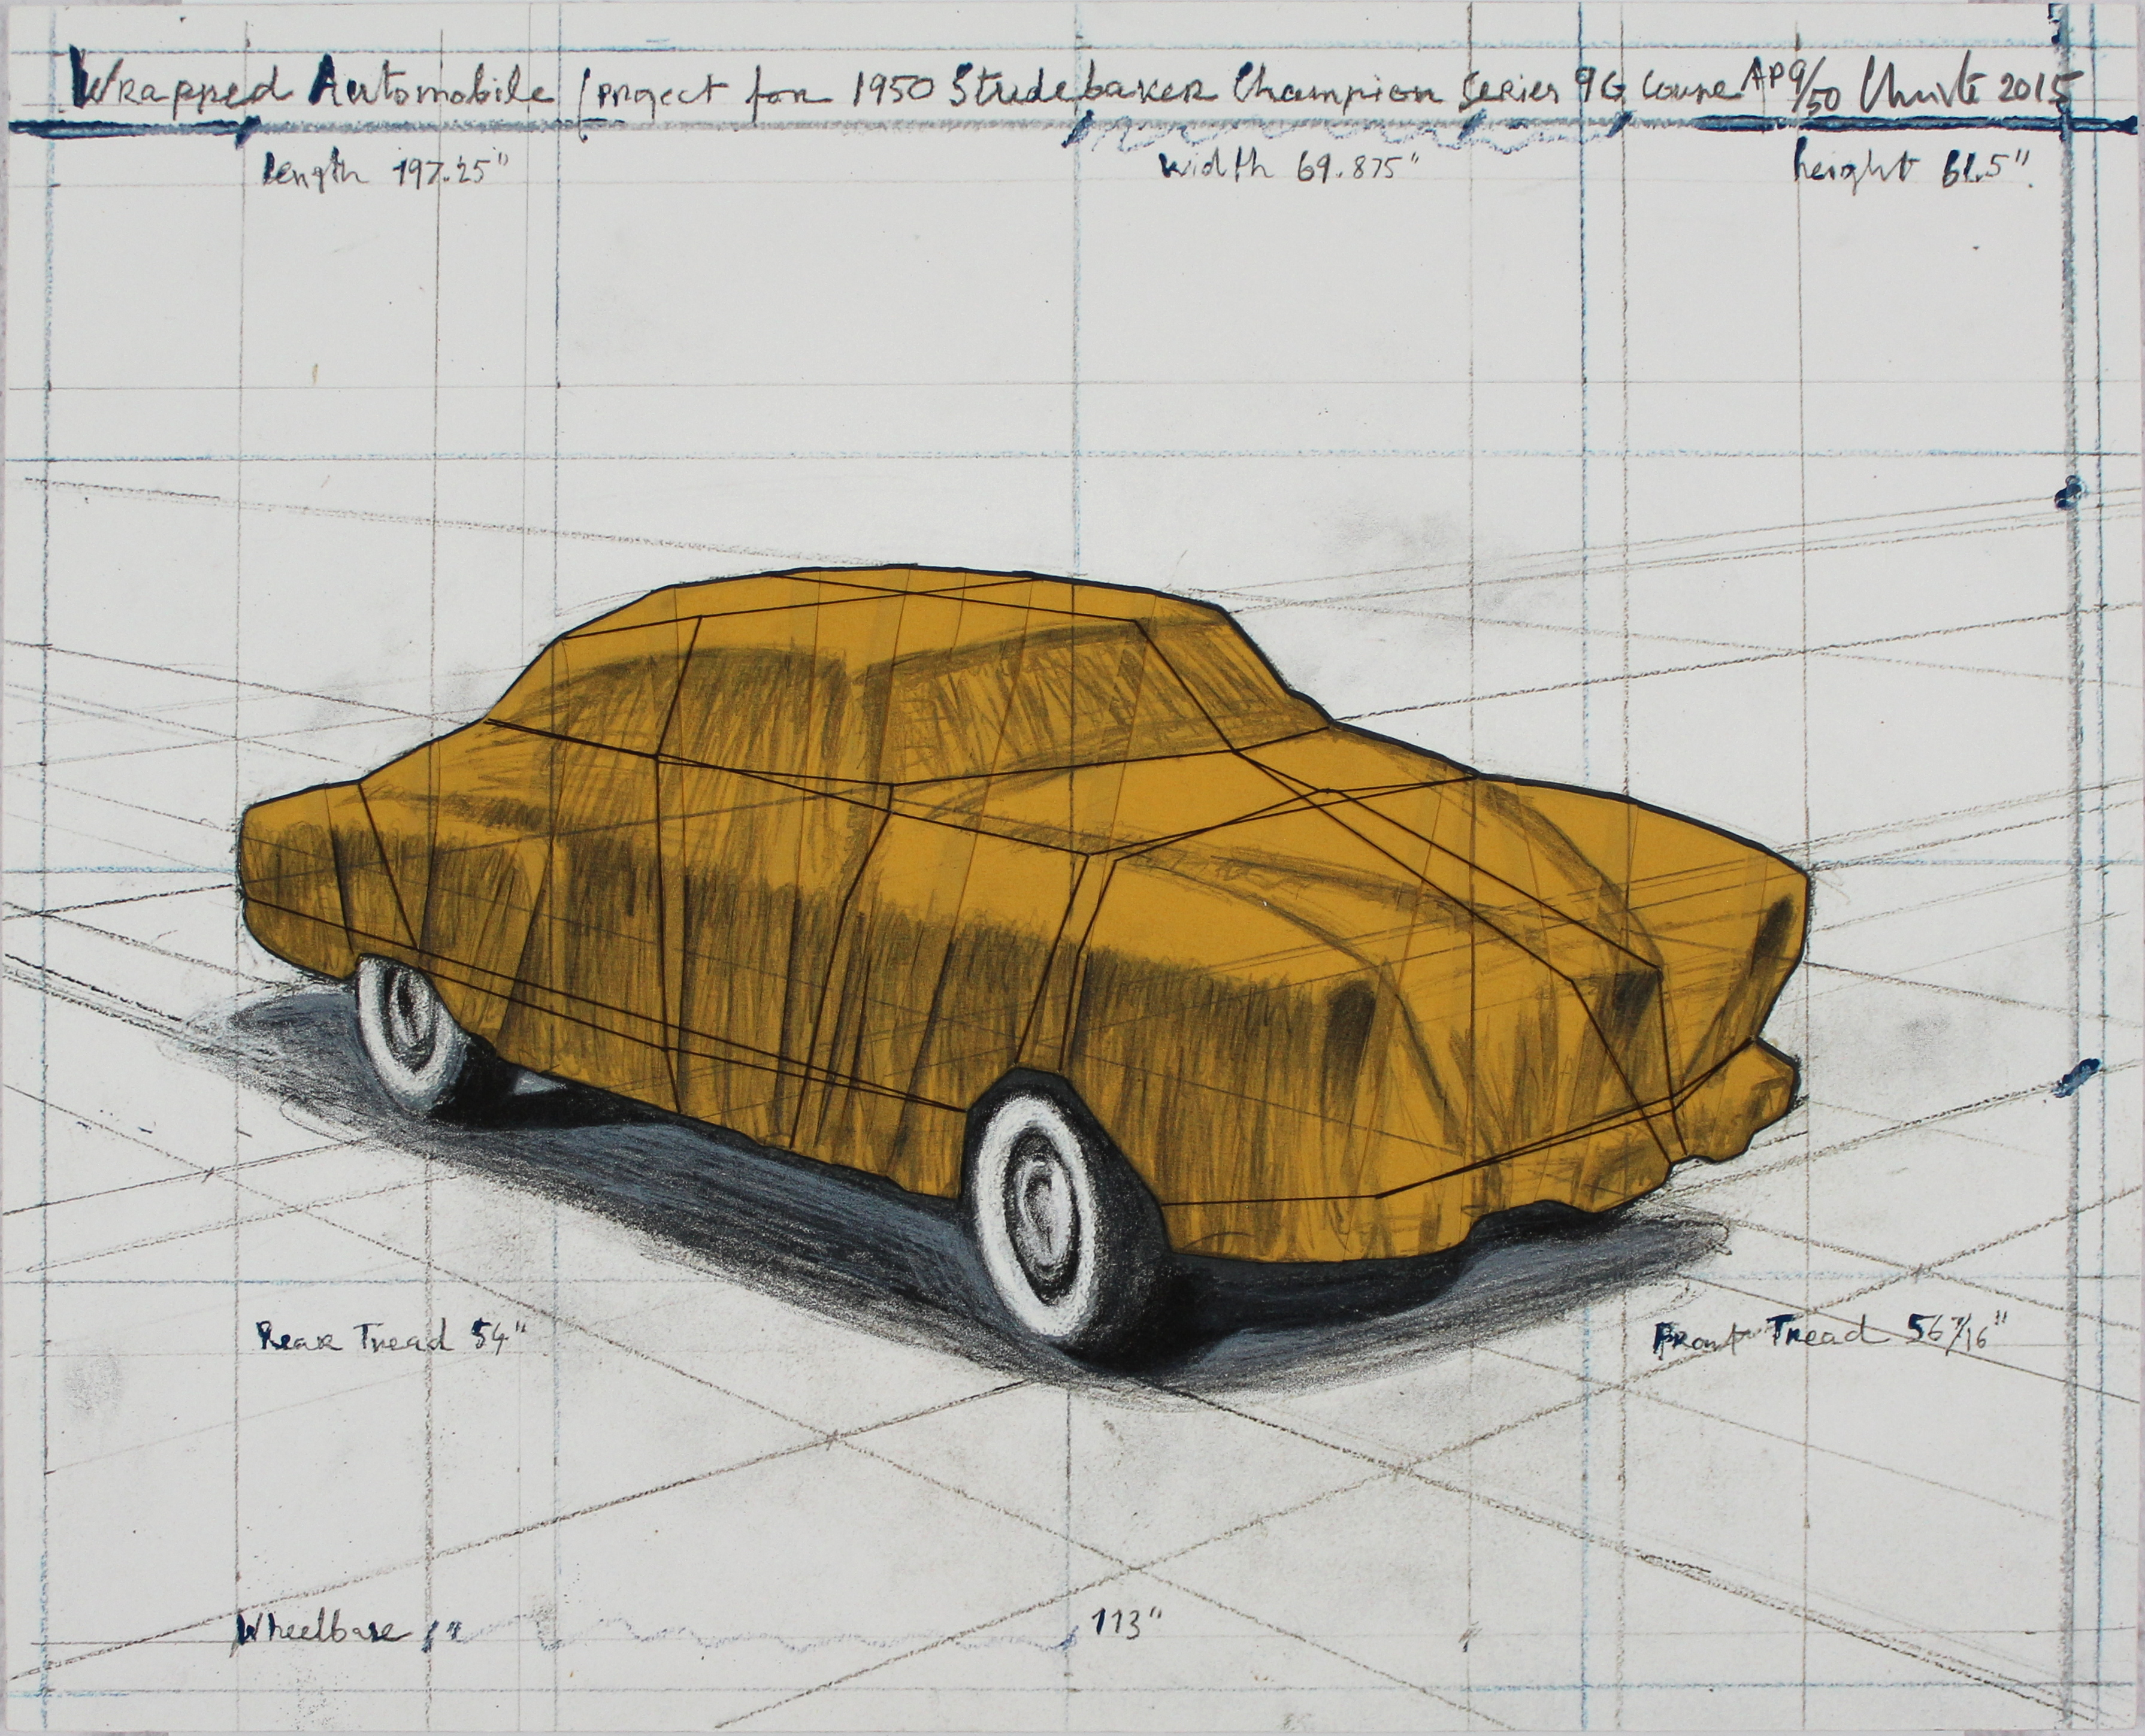 Wrapped Automobile, Project for 1950 Studebaker Champion, Series 9G Coupè